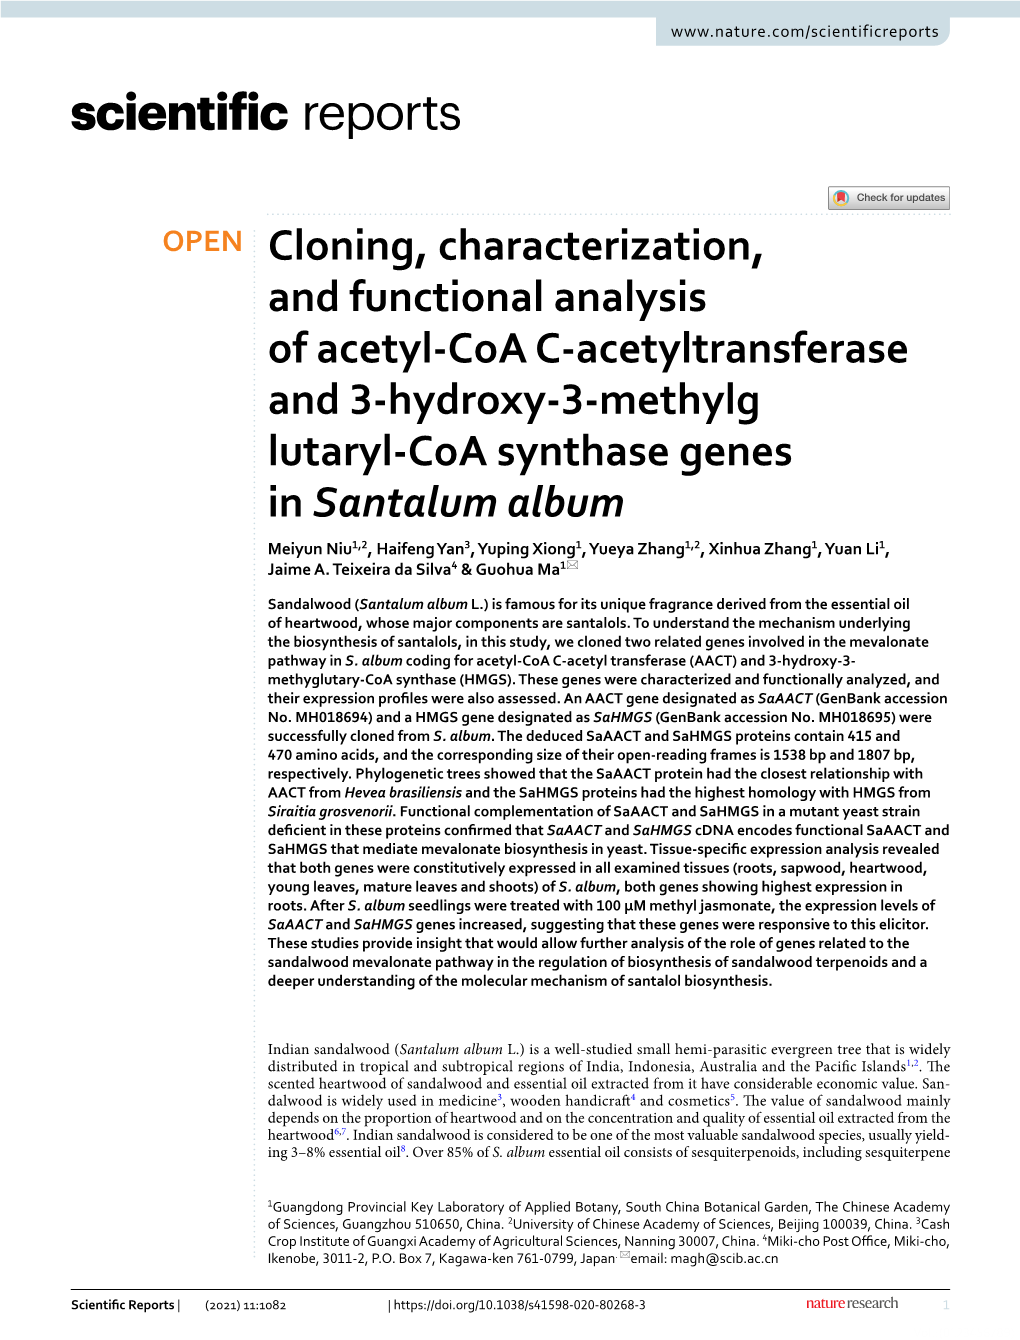 Cloning, Characterization, and Functional Analysis of Acetyl-Coa C